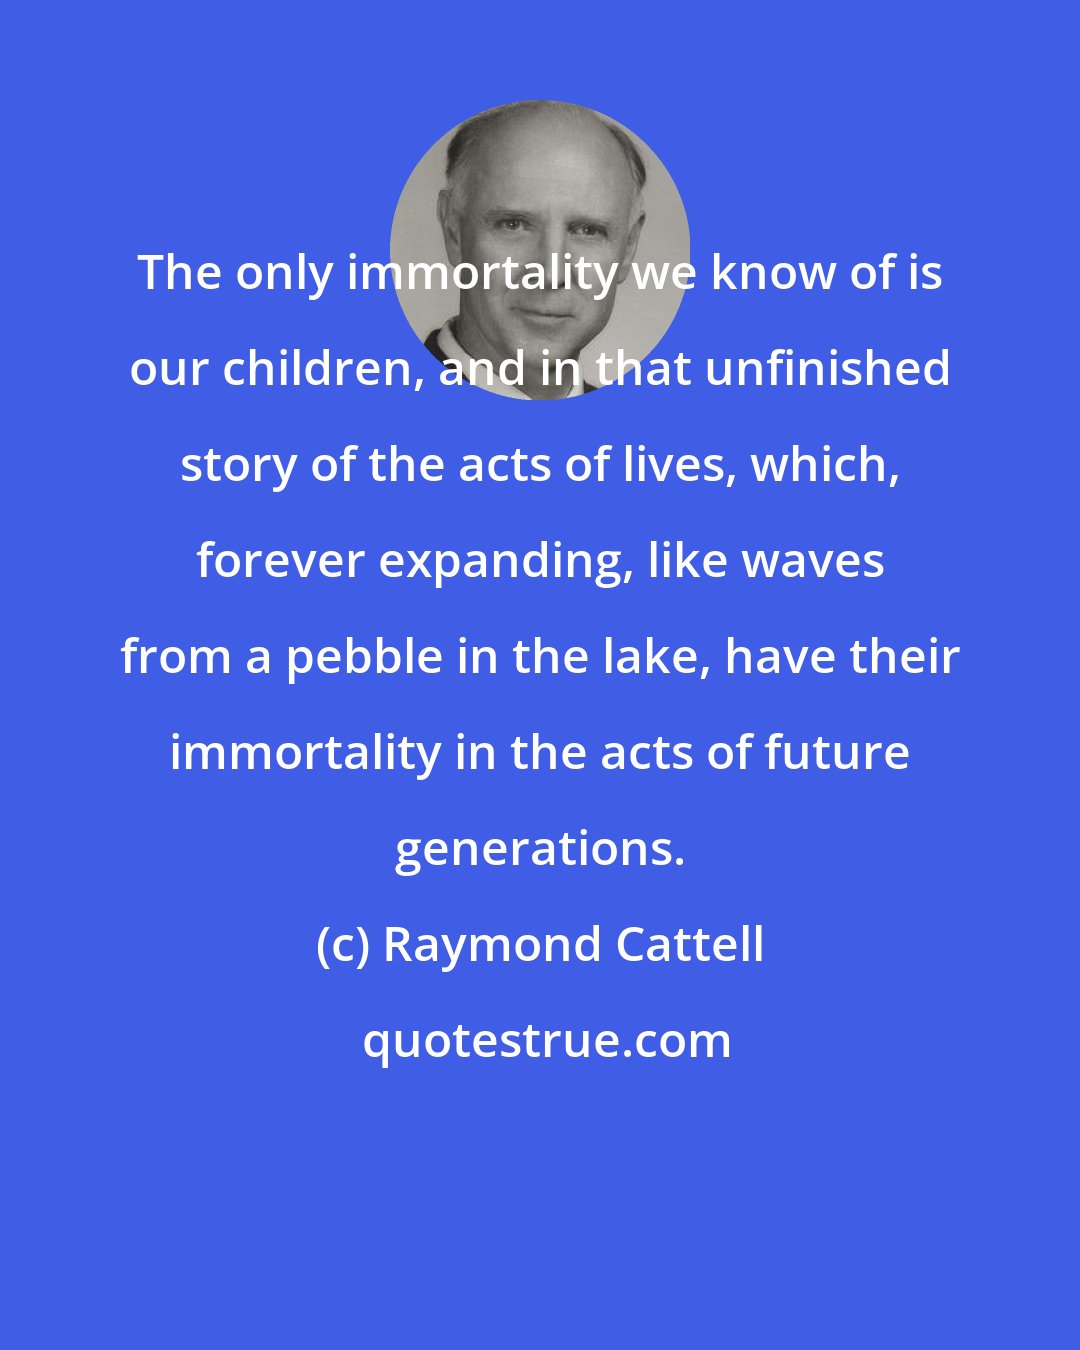 Raymond Cattell: The only immortality we know of is our children, and in that unfinished story of the acts of lives, which, forever expanding, like waves from a pebble in the lake, have their immortality in the acts of future generations.